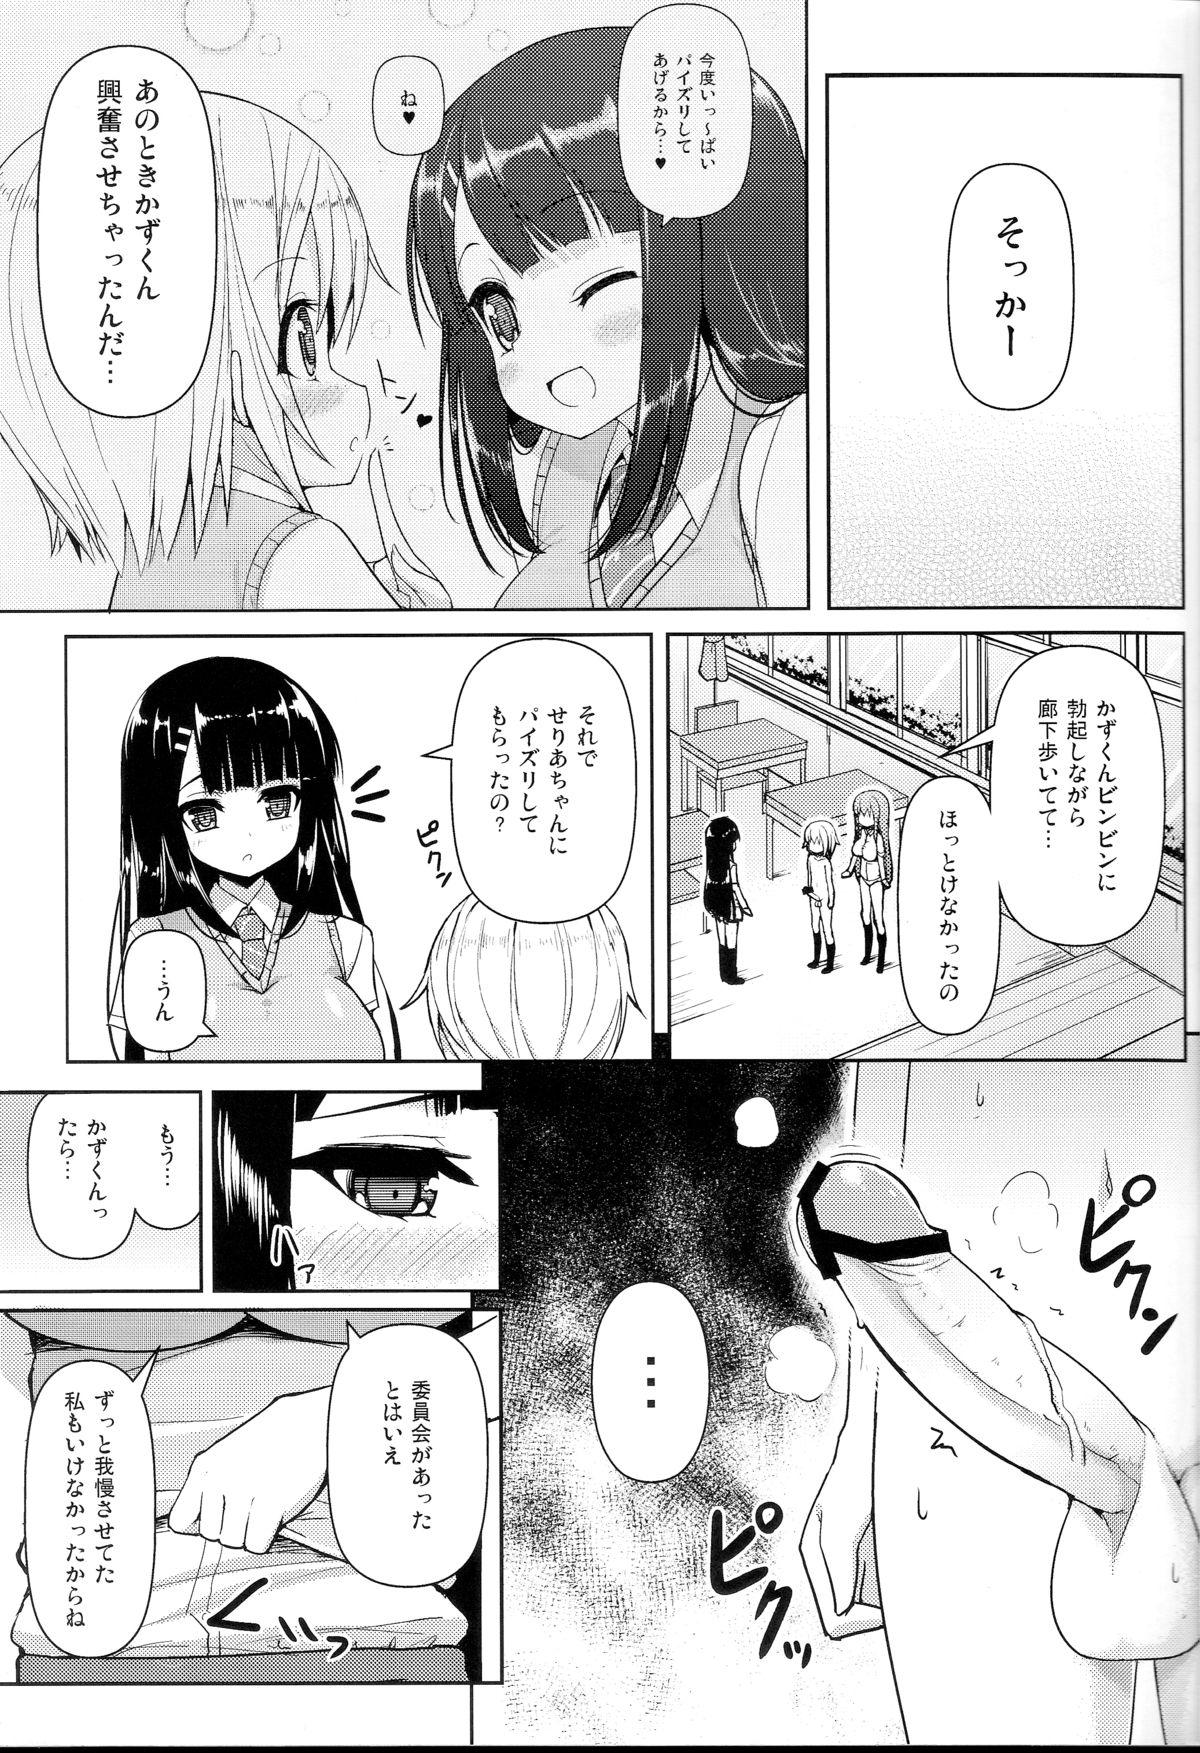 Best Blowjobs Ever Anetomo 3 Maid - Page 6